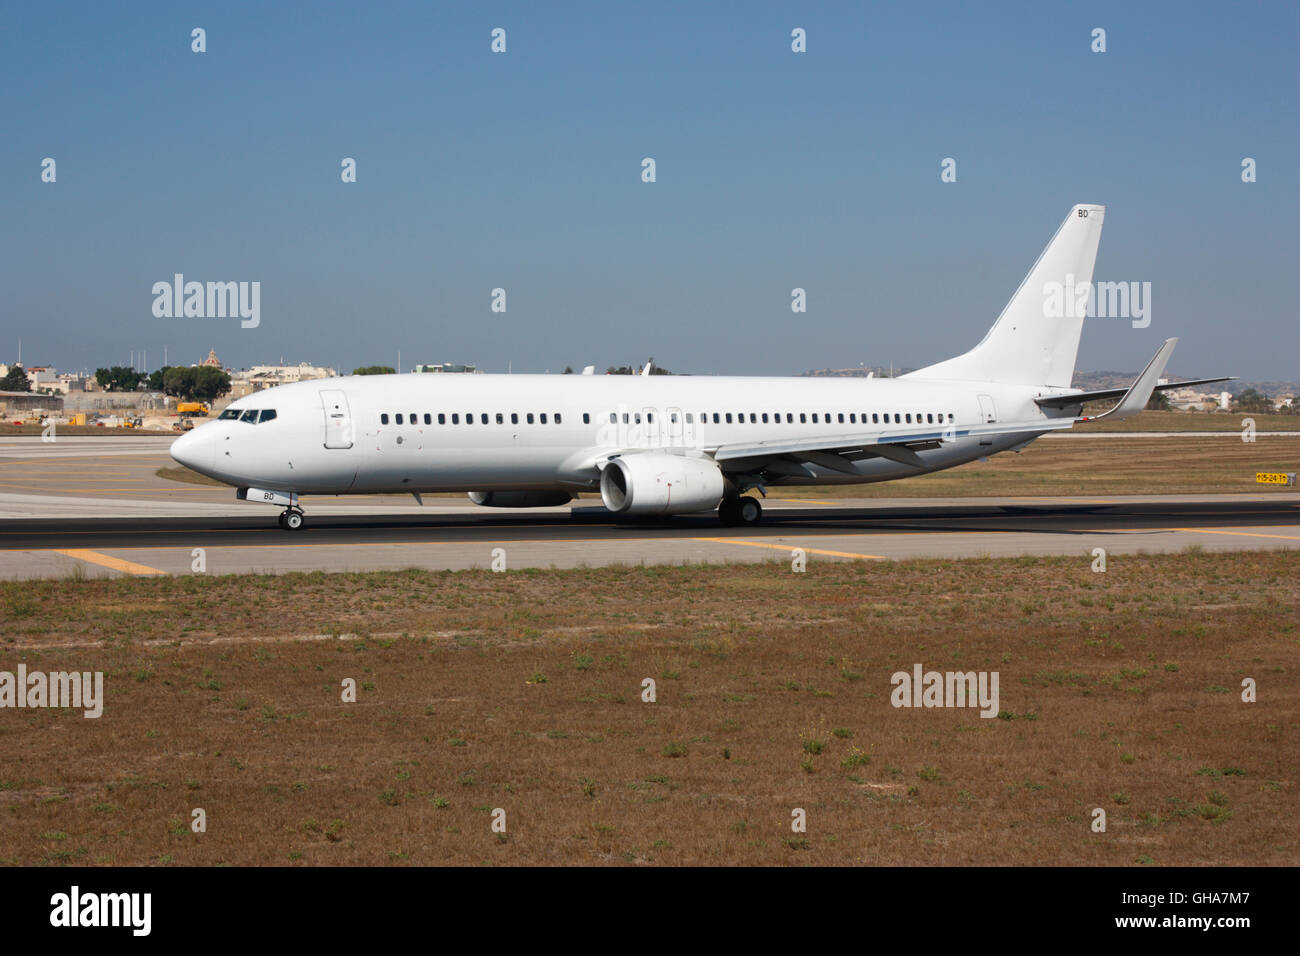 Modern aviation and air travel. Boeing 737 NG commercial jet plane taxiing on airport taxiway. No livery or logos and no faces visible. Stock Photo